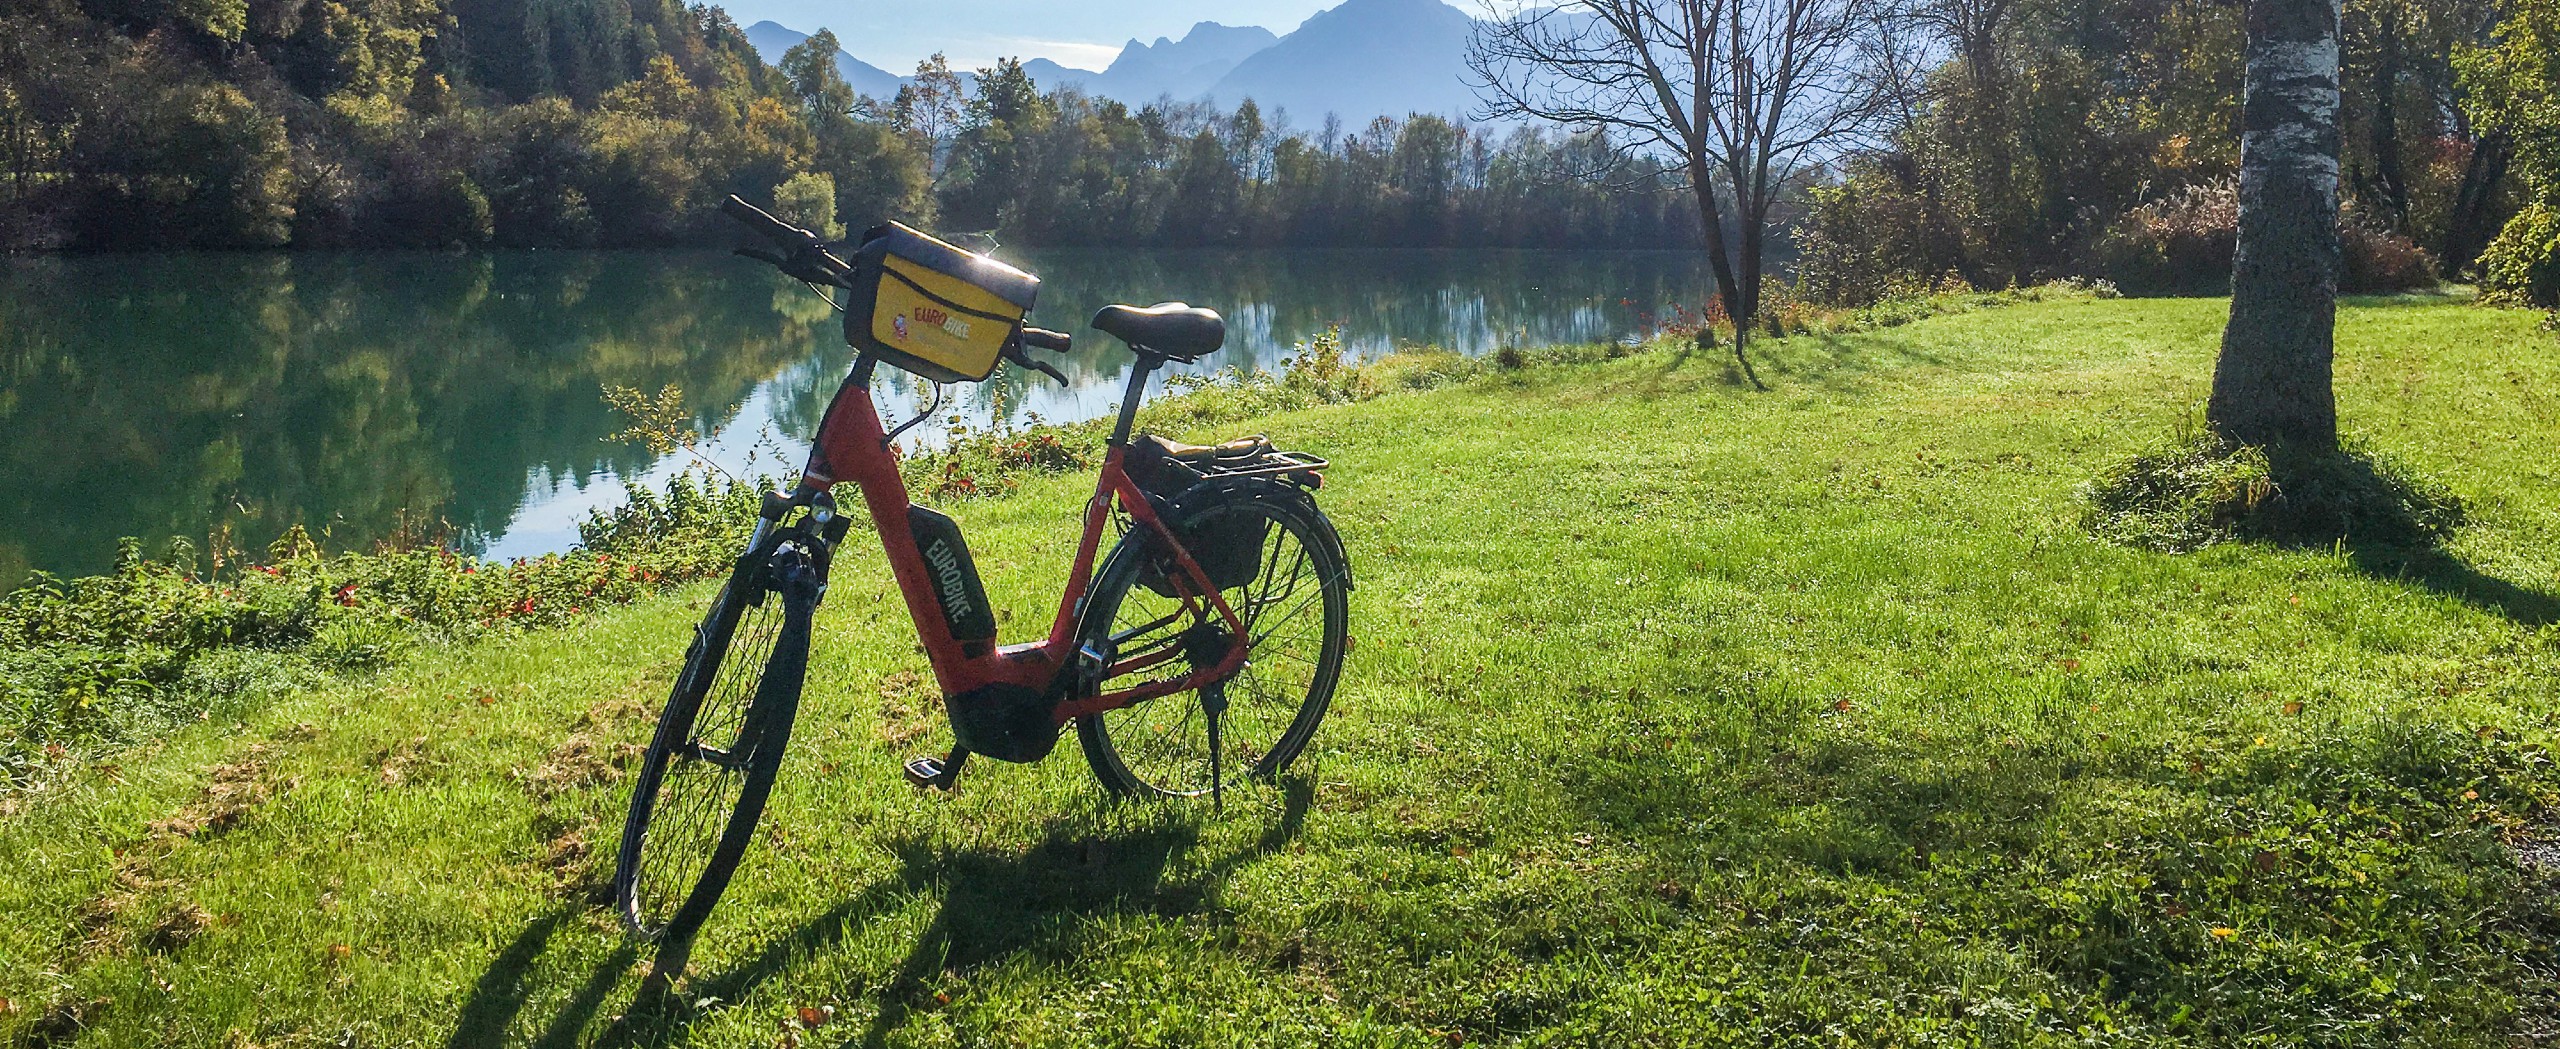 Drau Cycle Path from Italy to Austria Tour